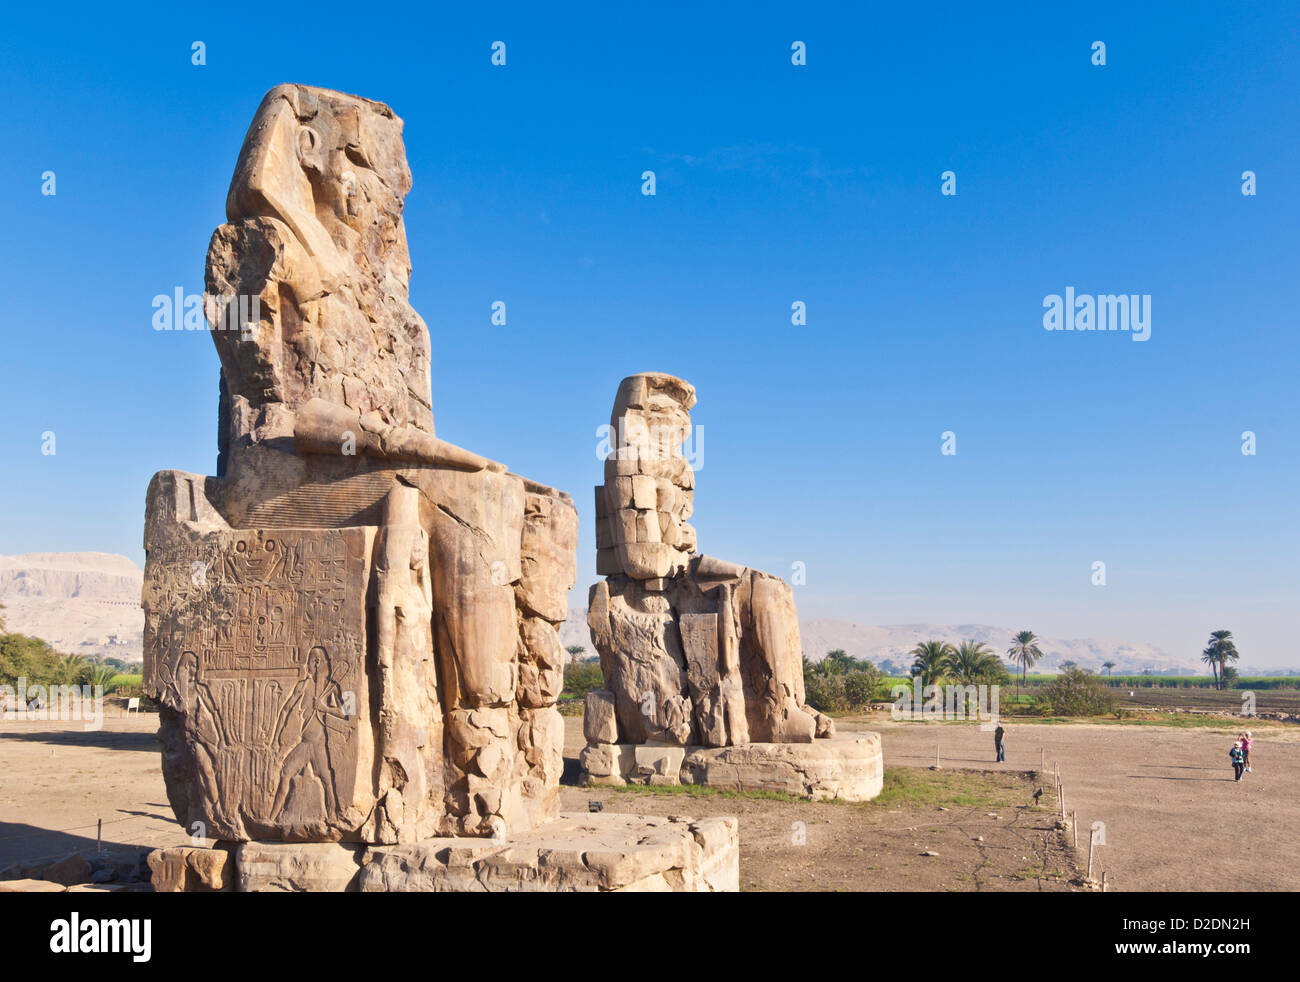 two gigantic statues known as the Colossi of Memnon West bank of Luxor Egypt Middle East Stock Photo